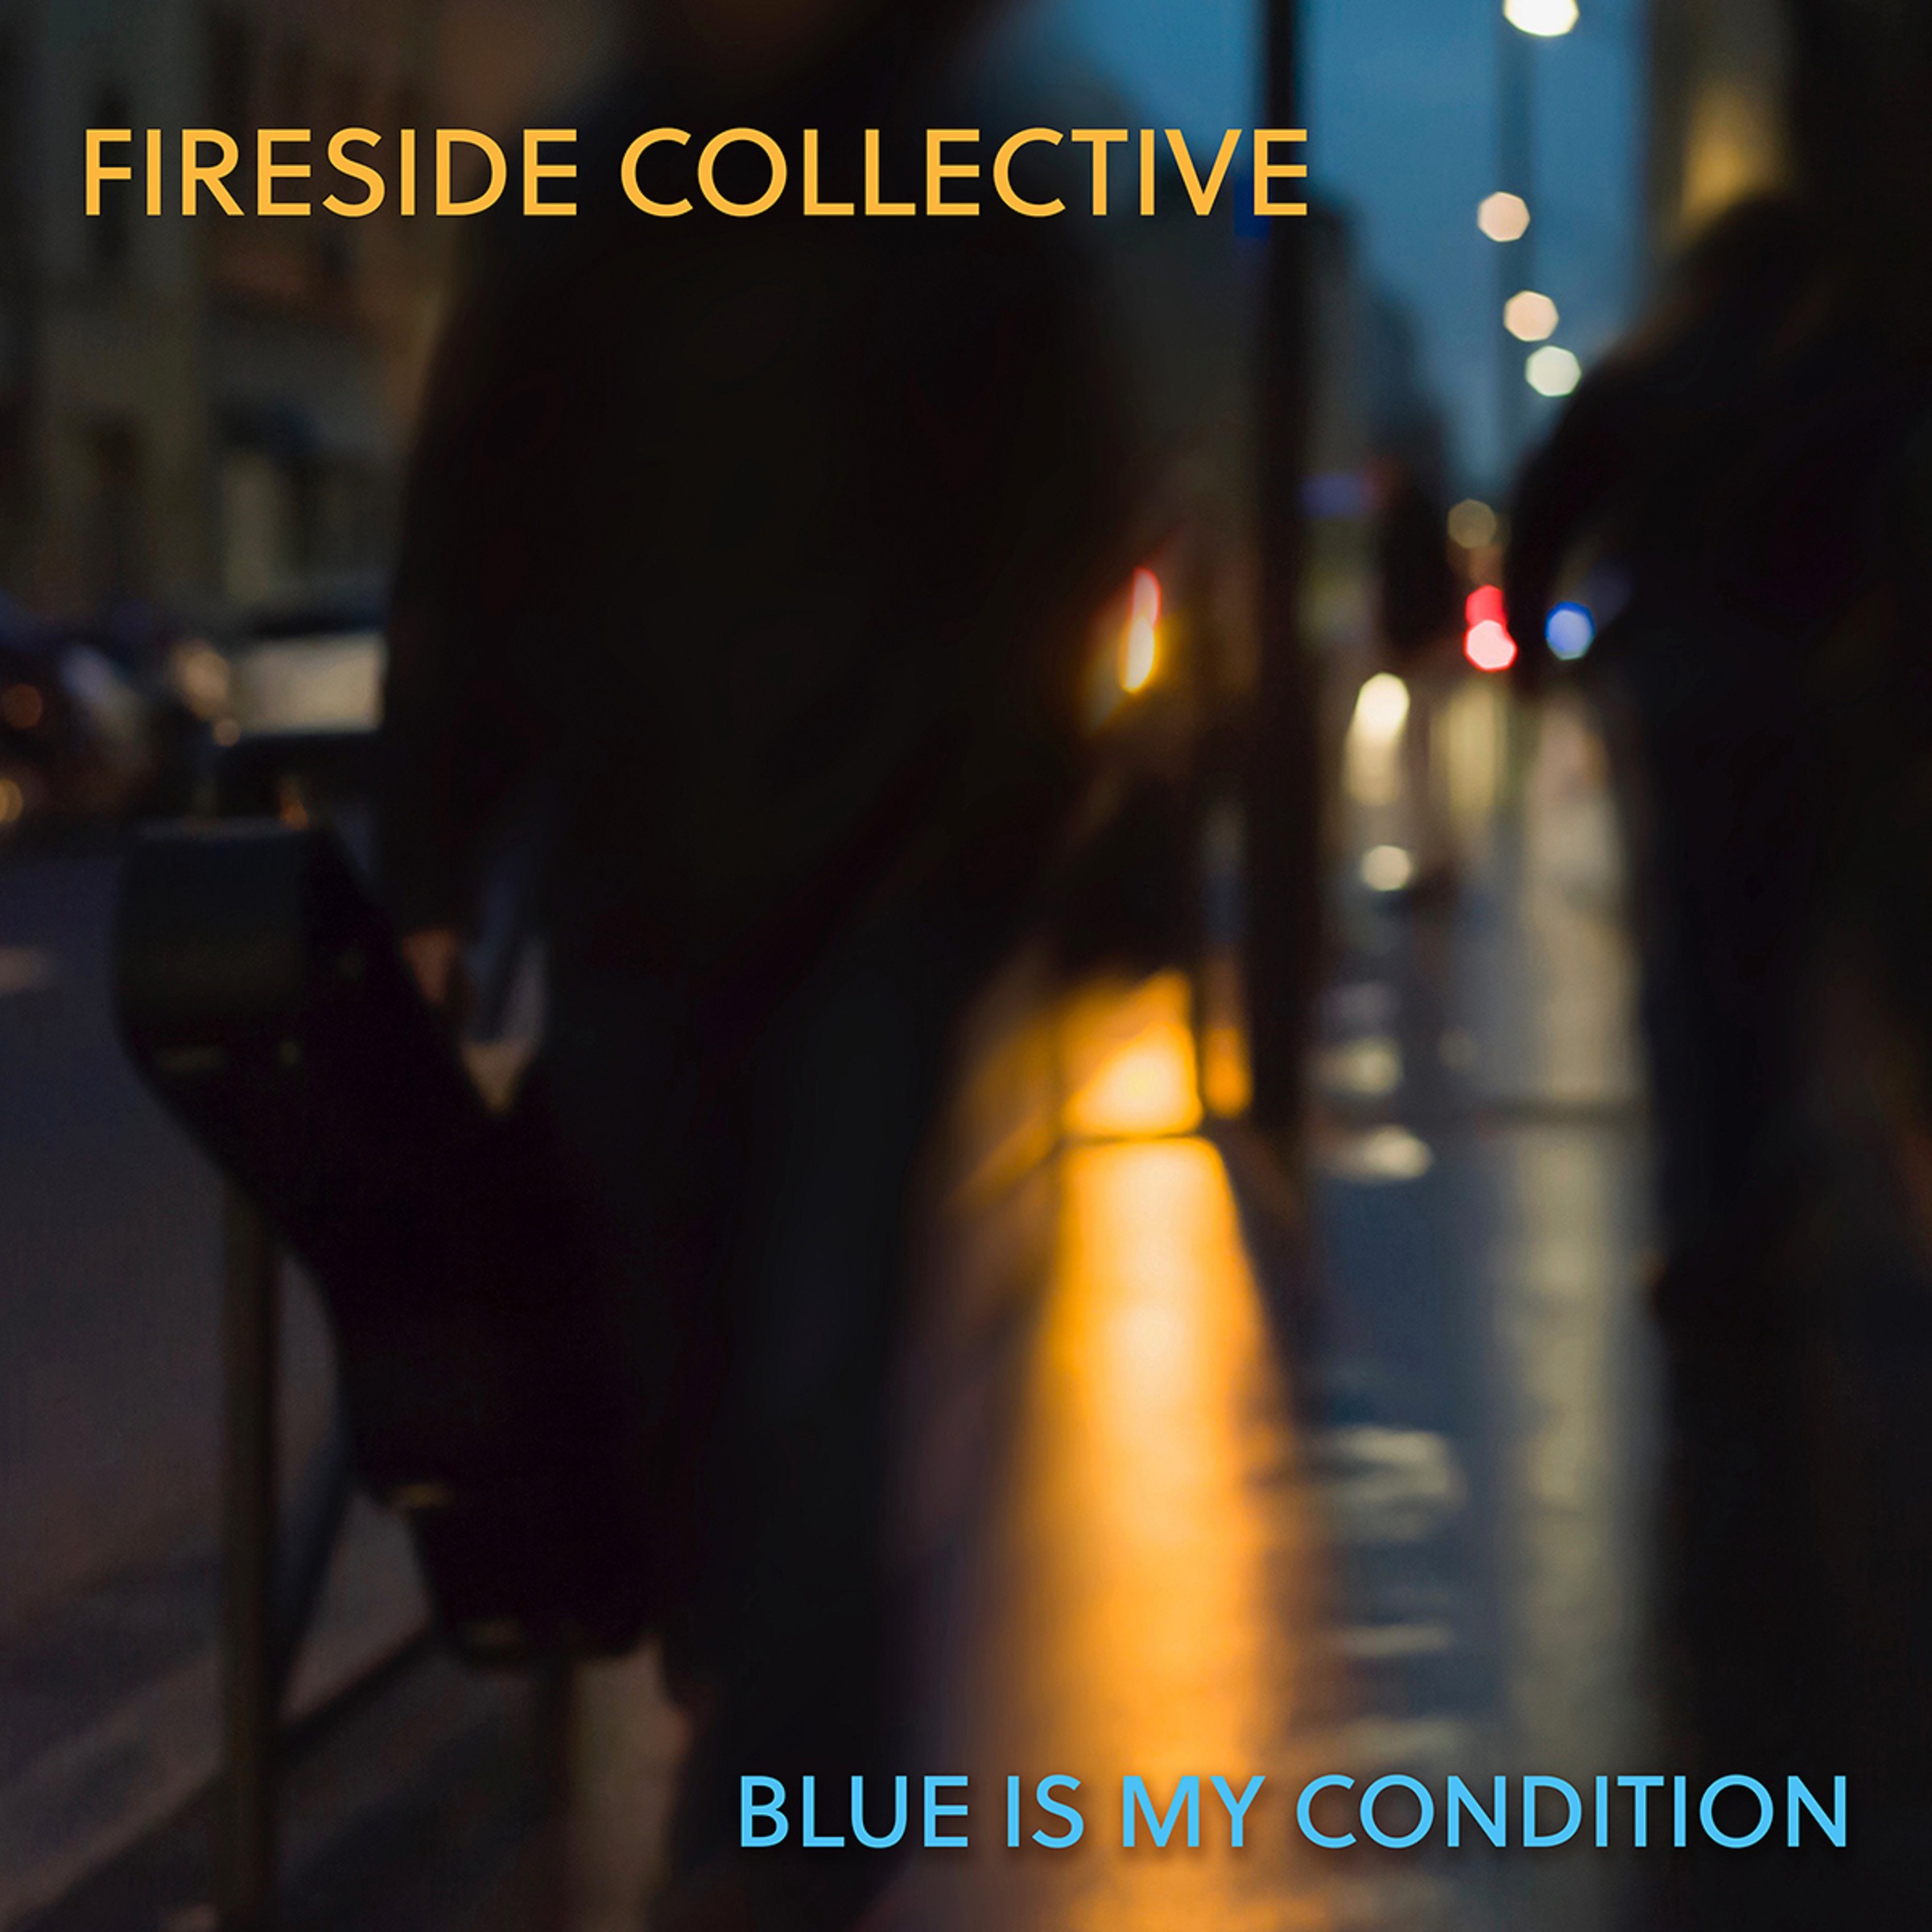 Fireside Collective brings modern edge to bluegrass with “Blue Is My Condition”